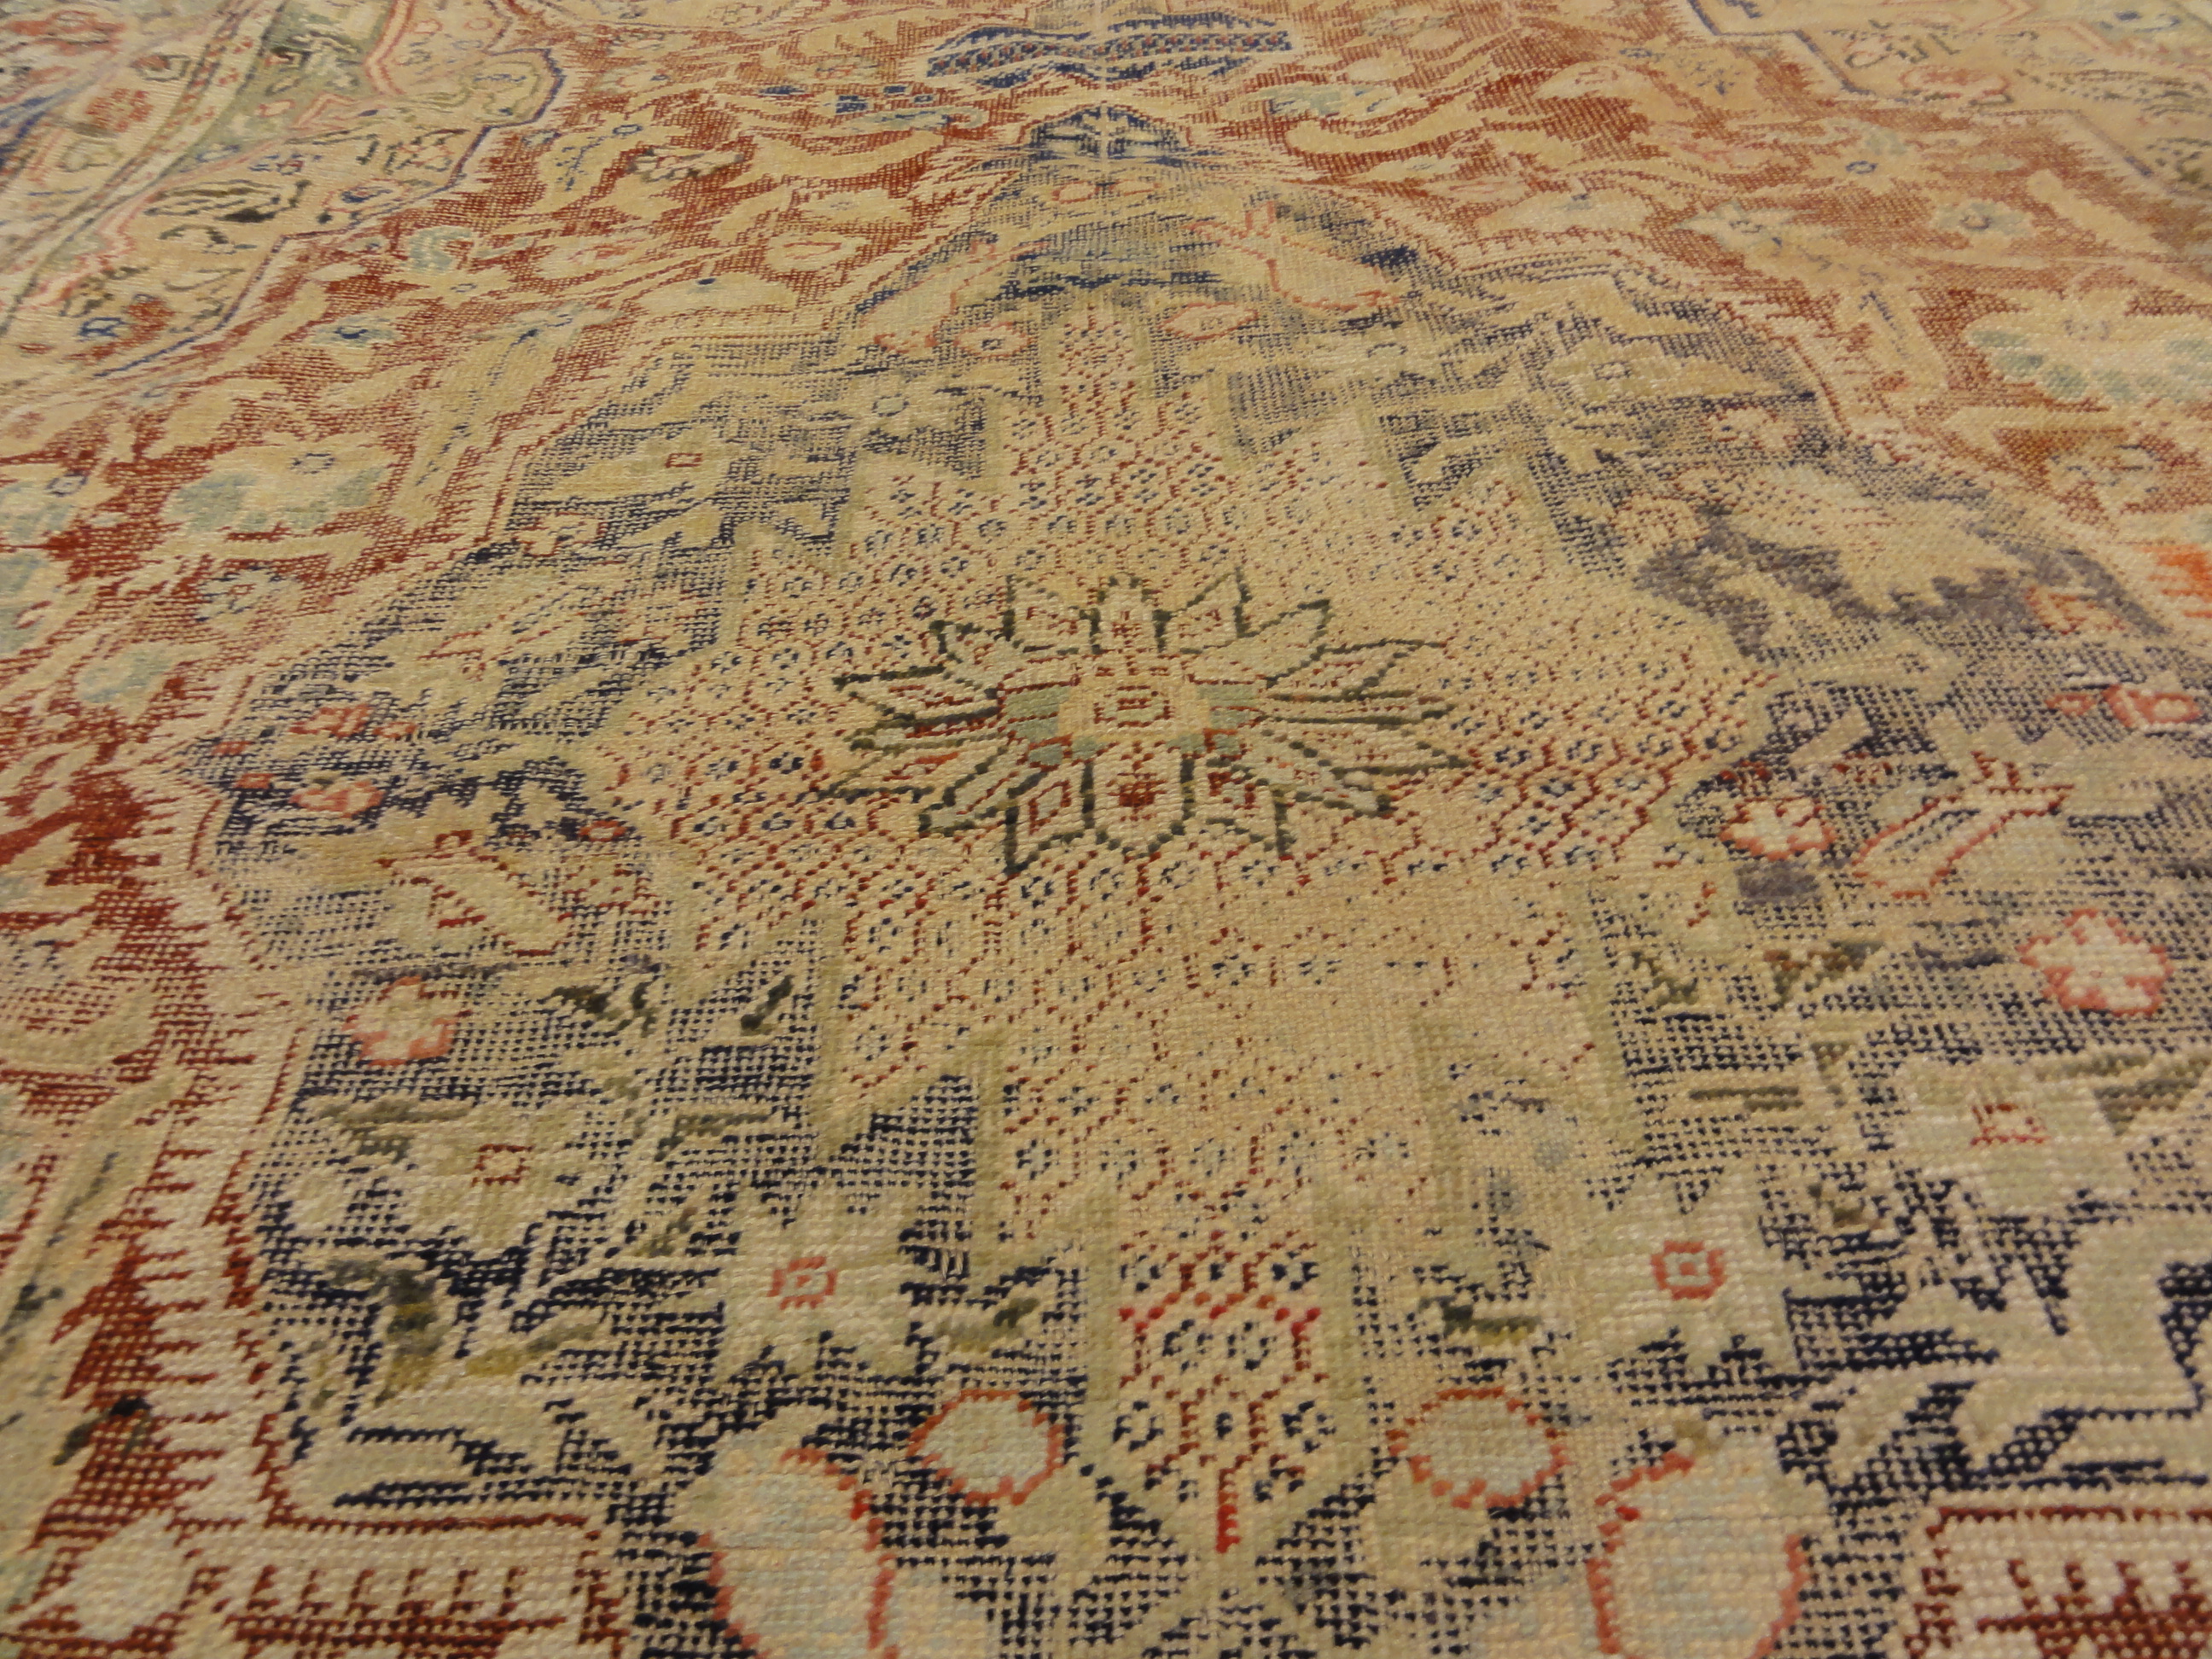 Antique Silk Turkish Kaysari Rug. A piece of genuine, woven carpet art sold by the Santa Barbara Design Center, Rugs and More.